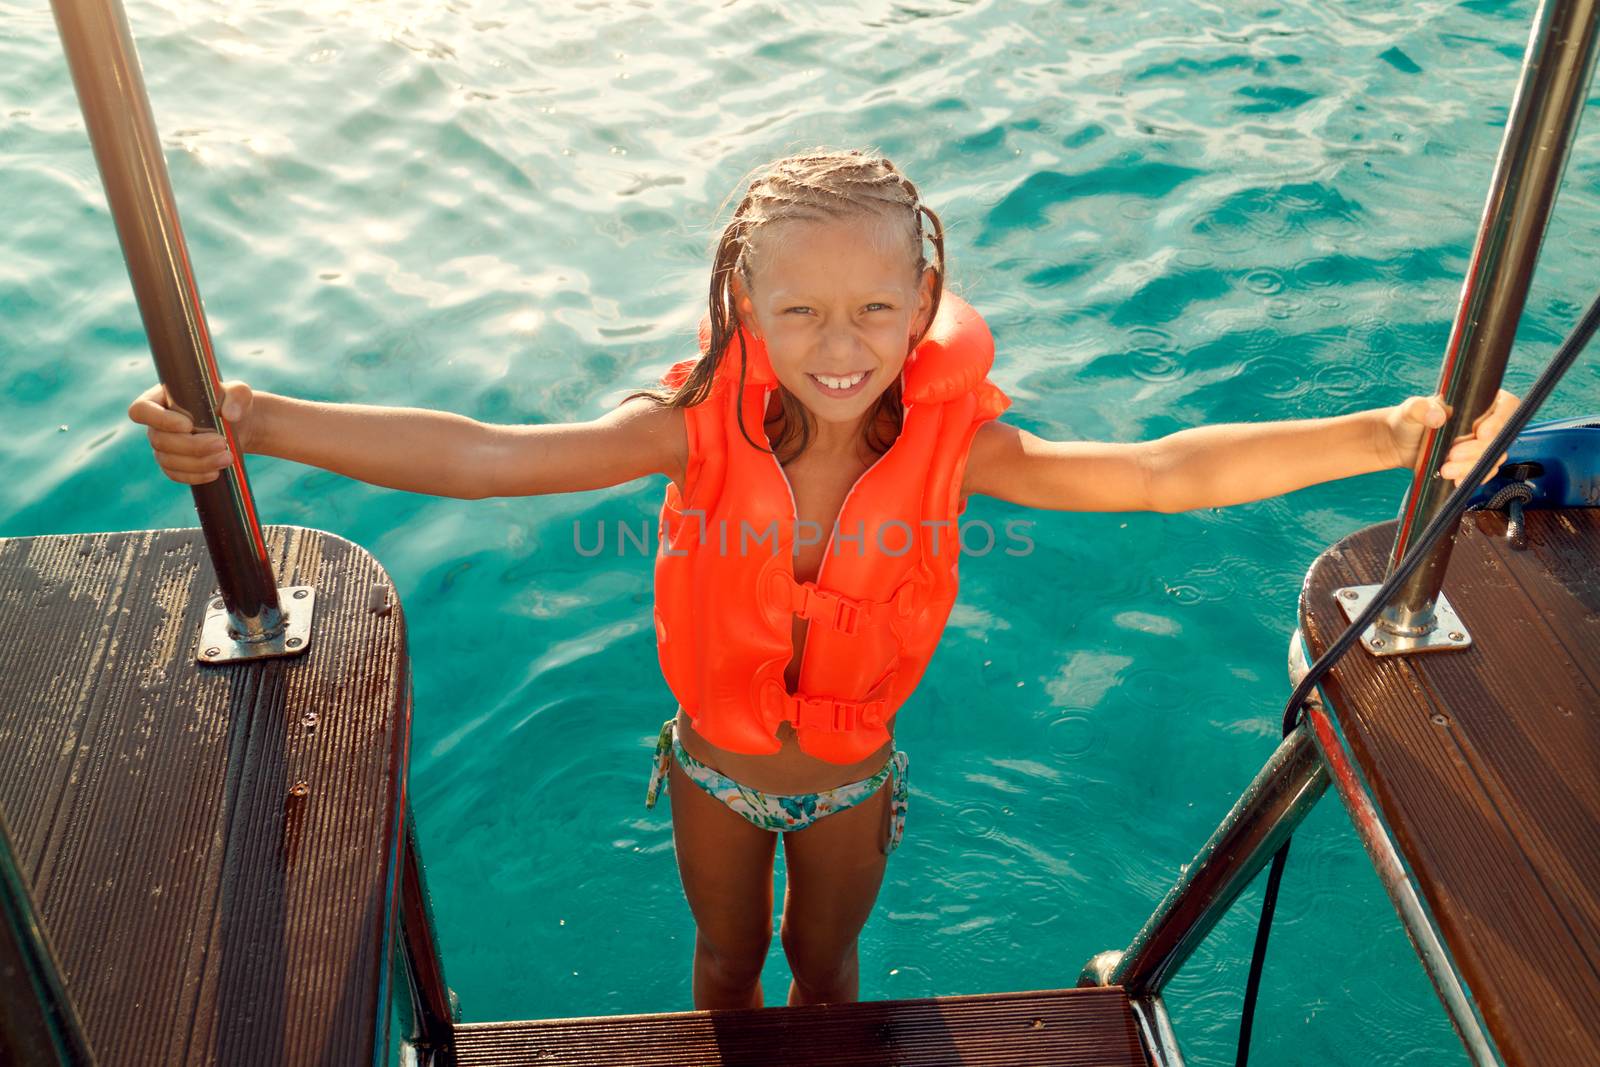 Little Girl On A Cruise by MilanMarkovic78